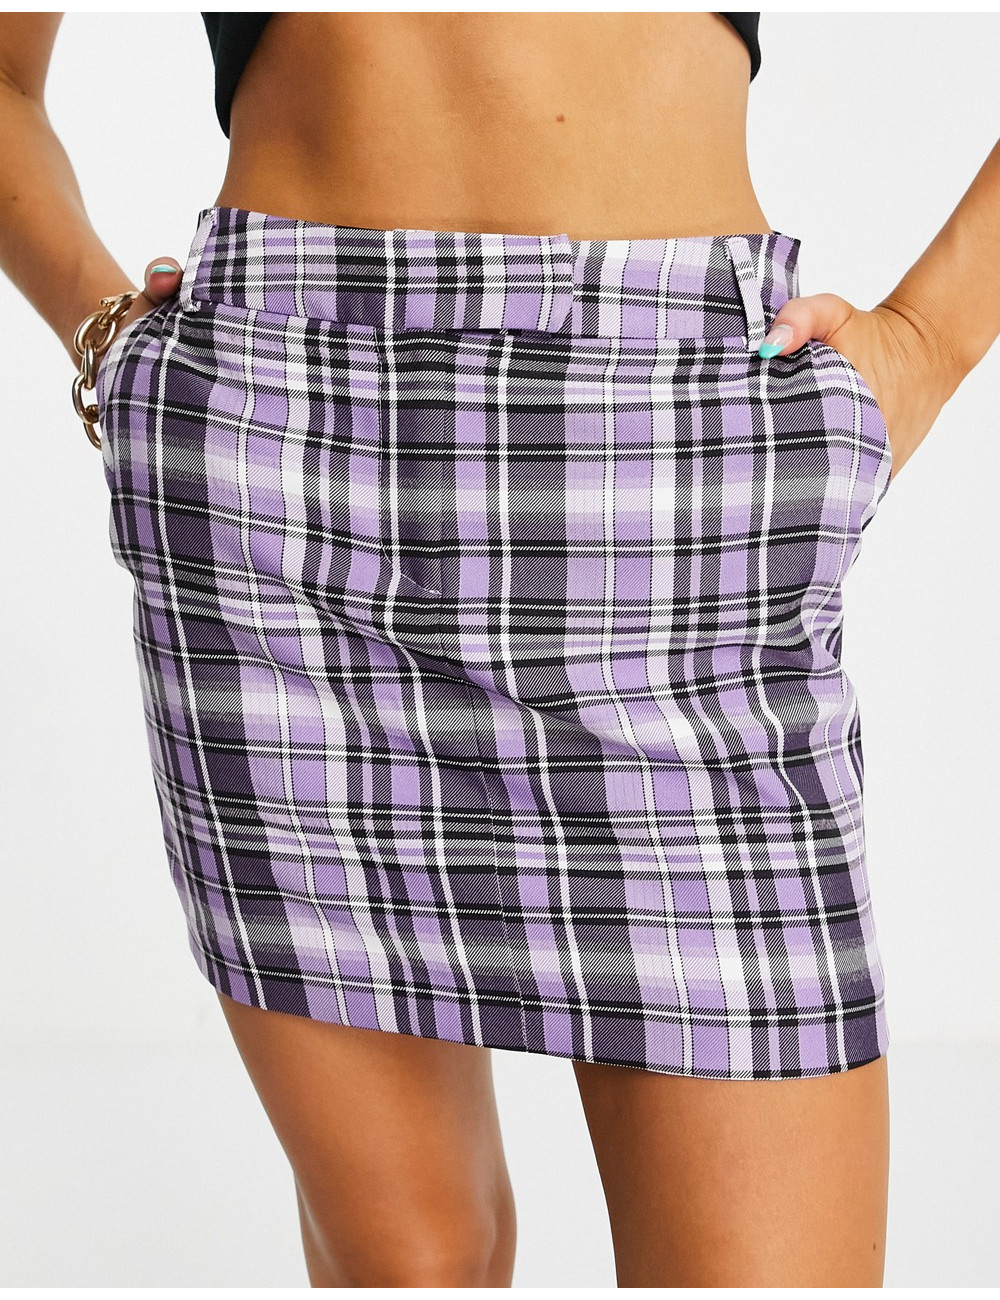 Topshop mini skirt in lilac...